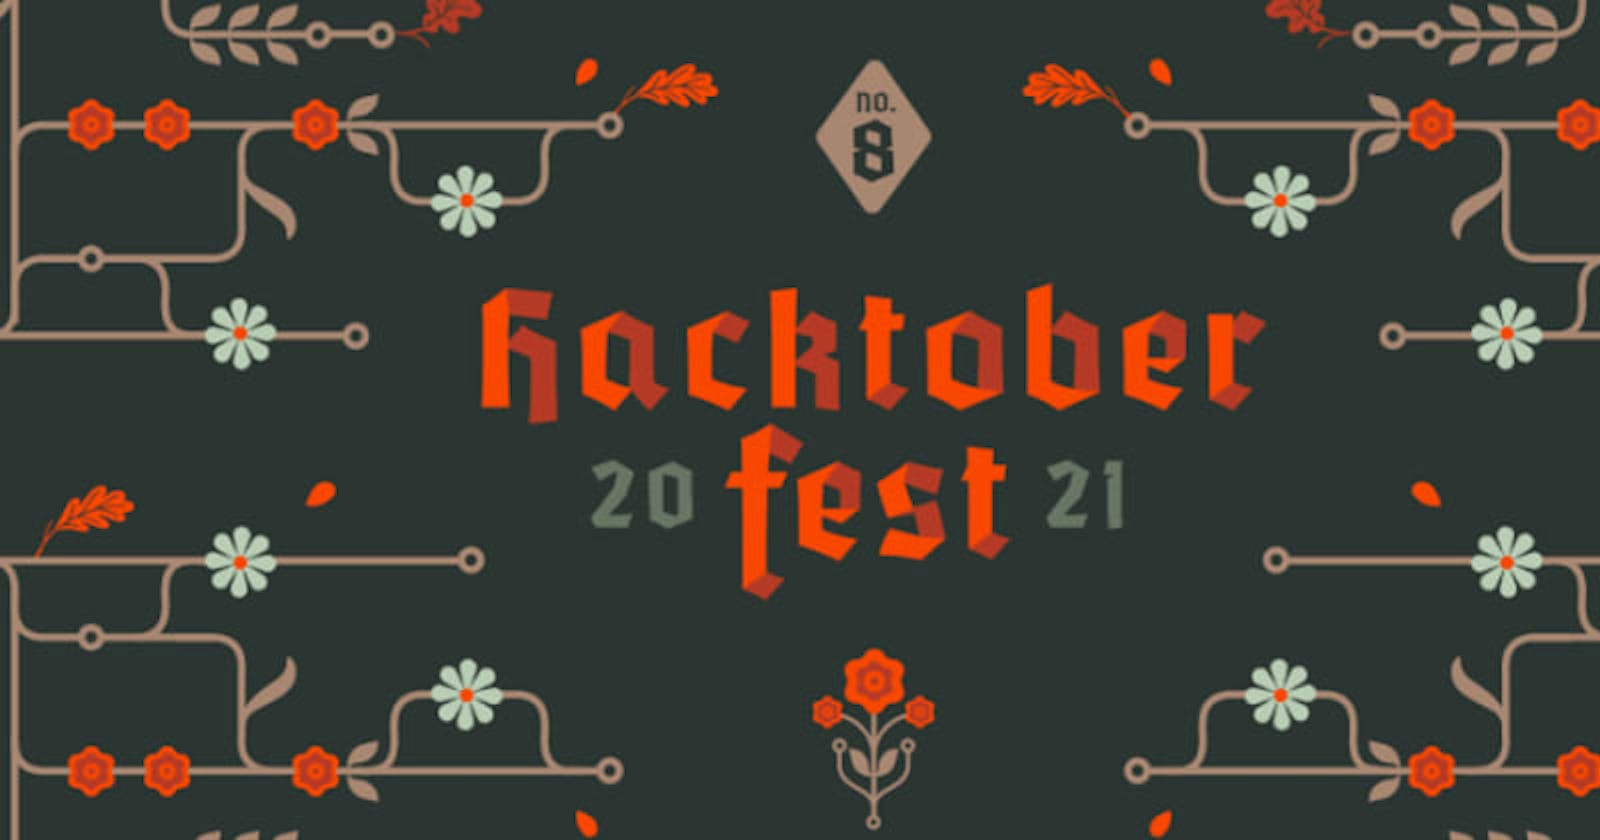 First Hacktoberfest and open source contribution